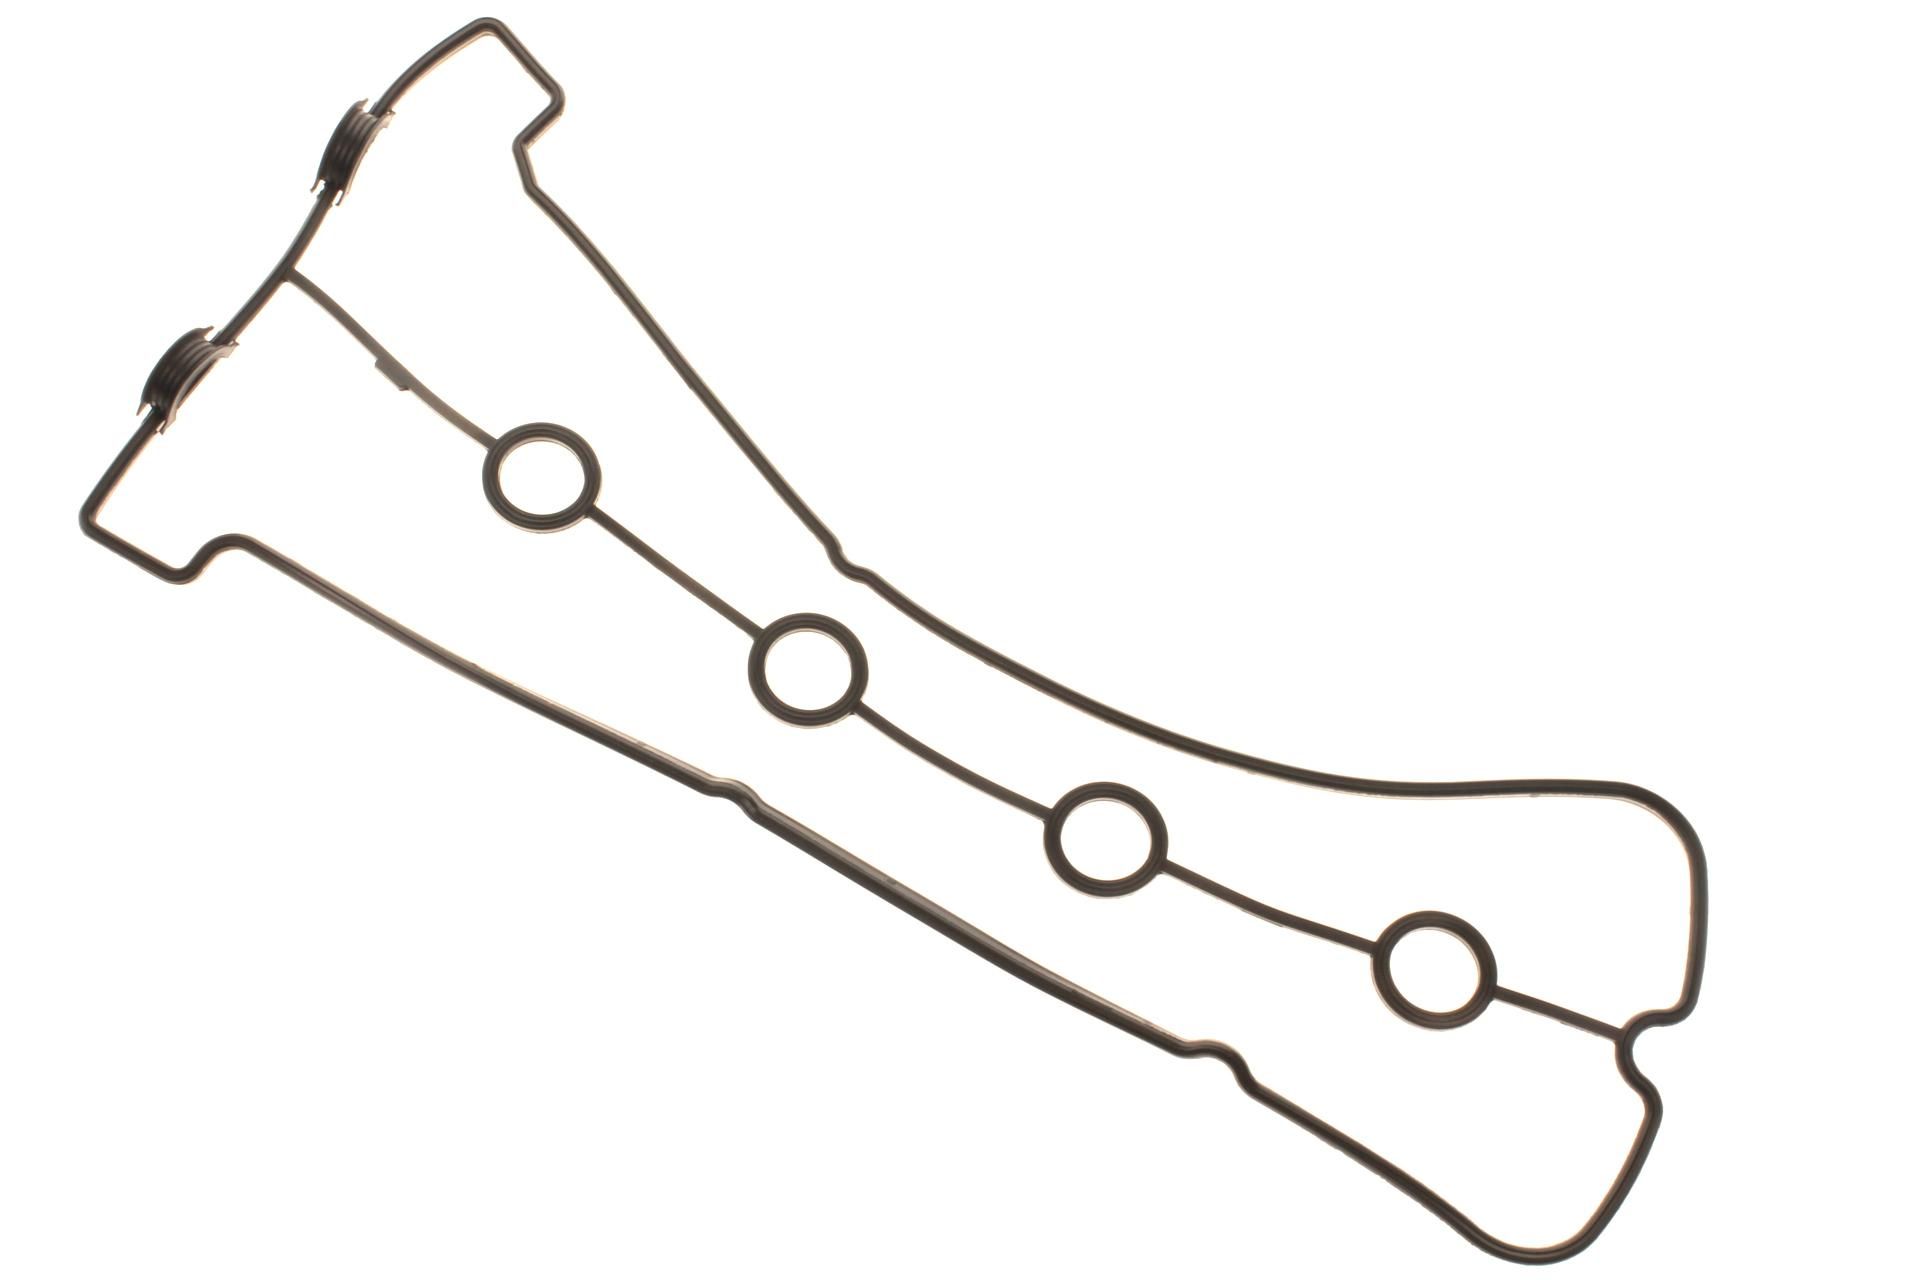 6BH-11193-00-00 HEAD COVER GASKET